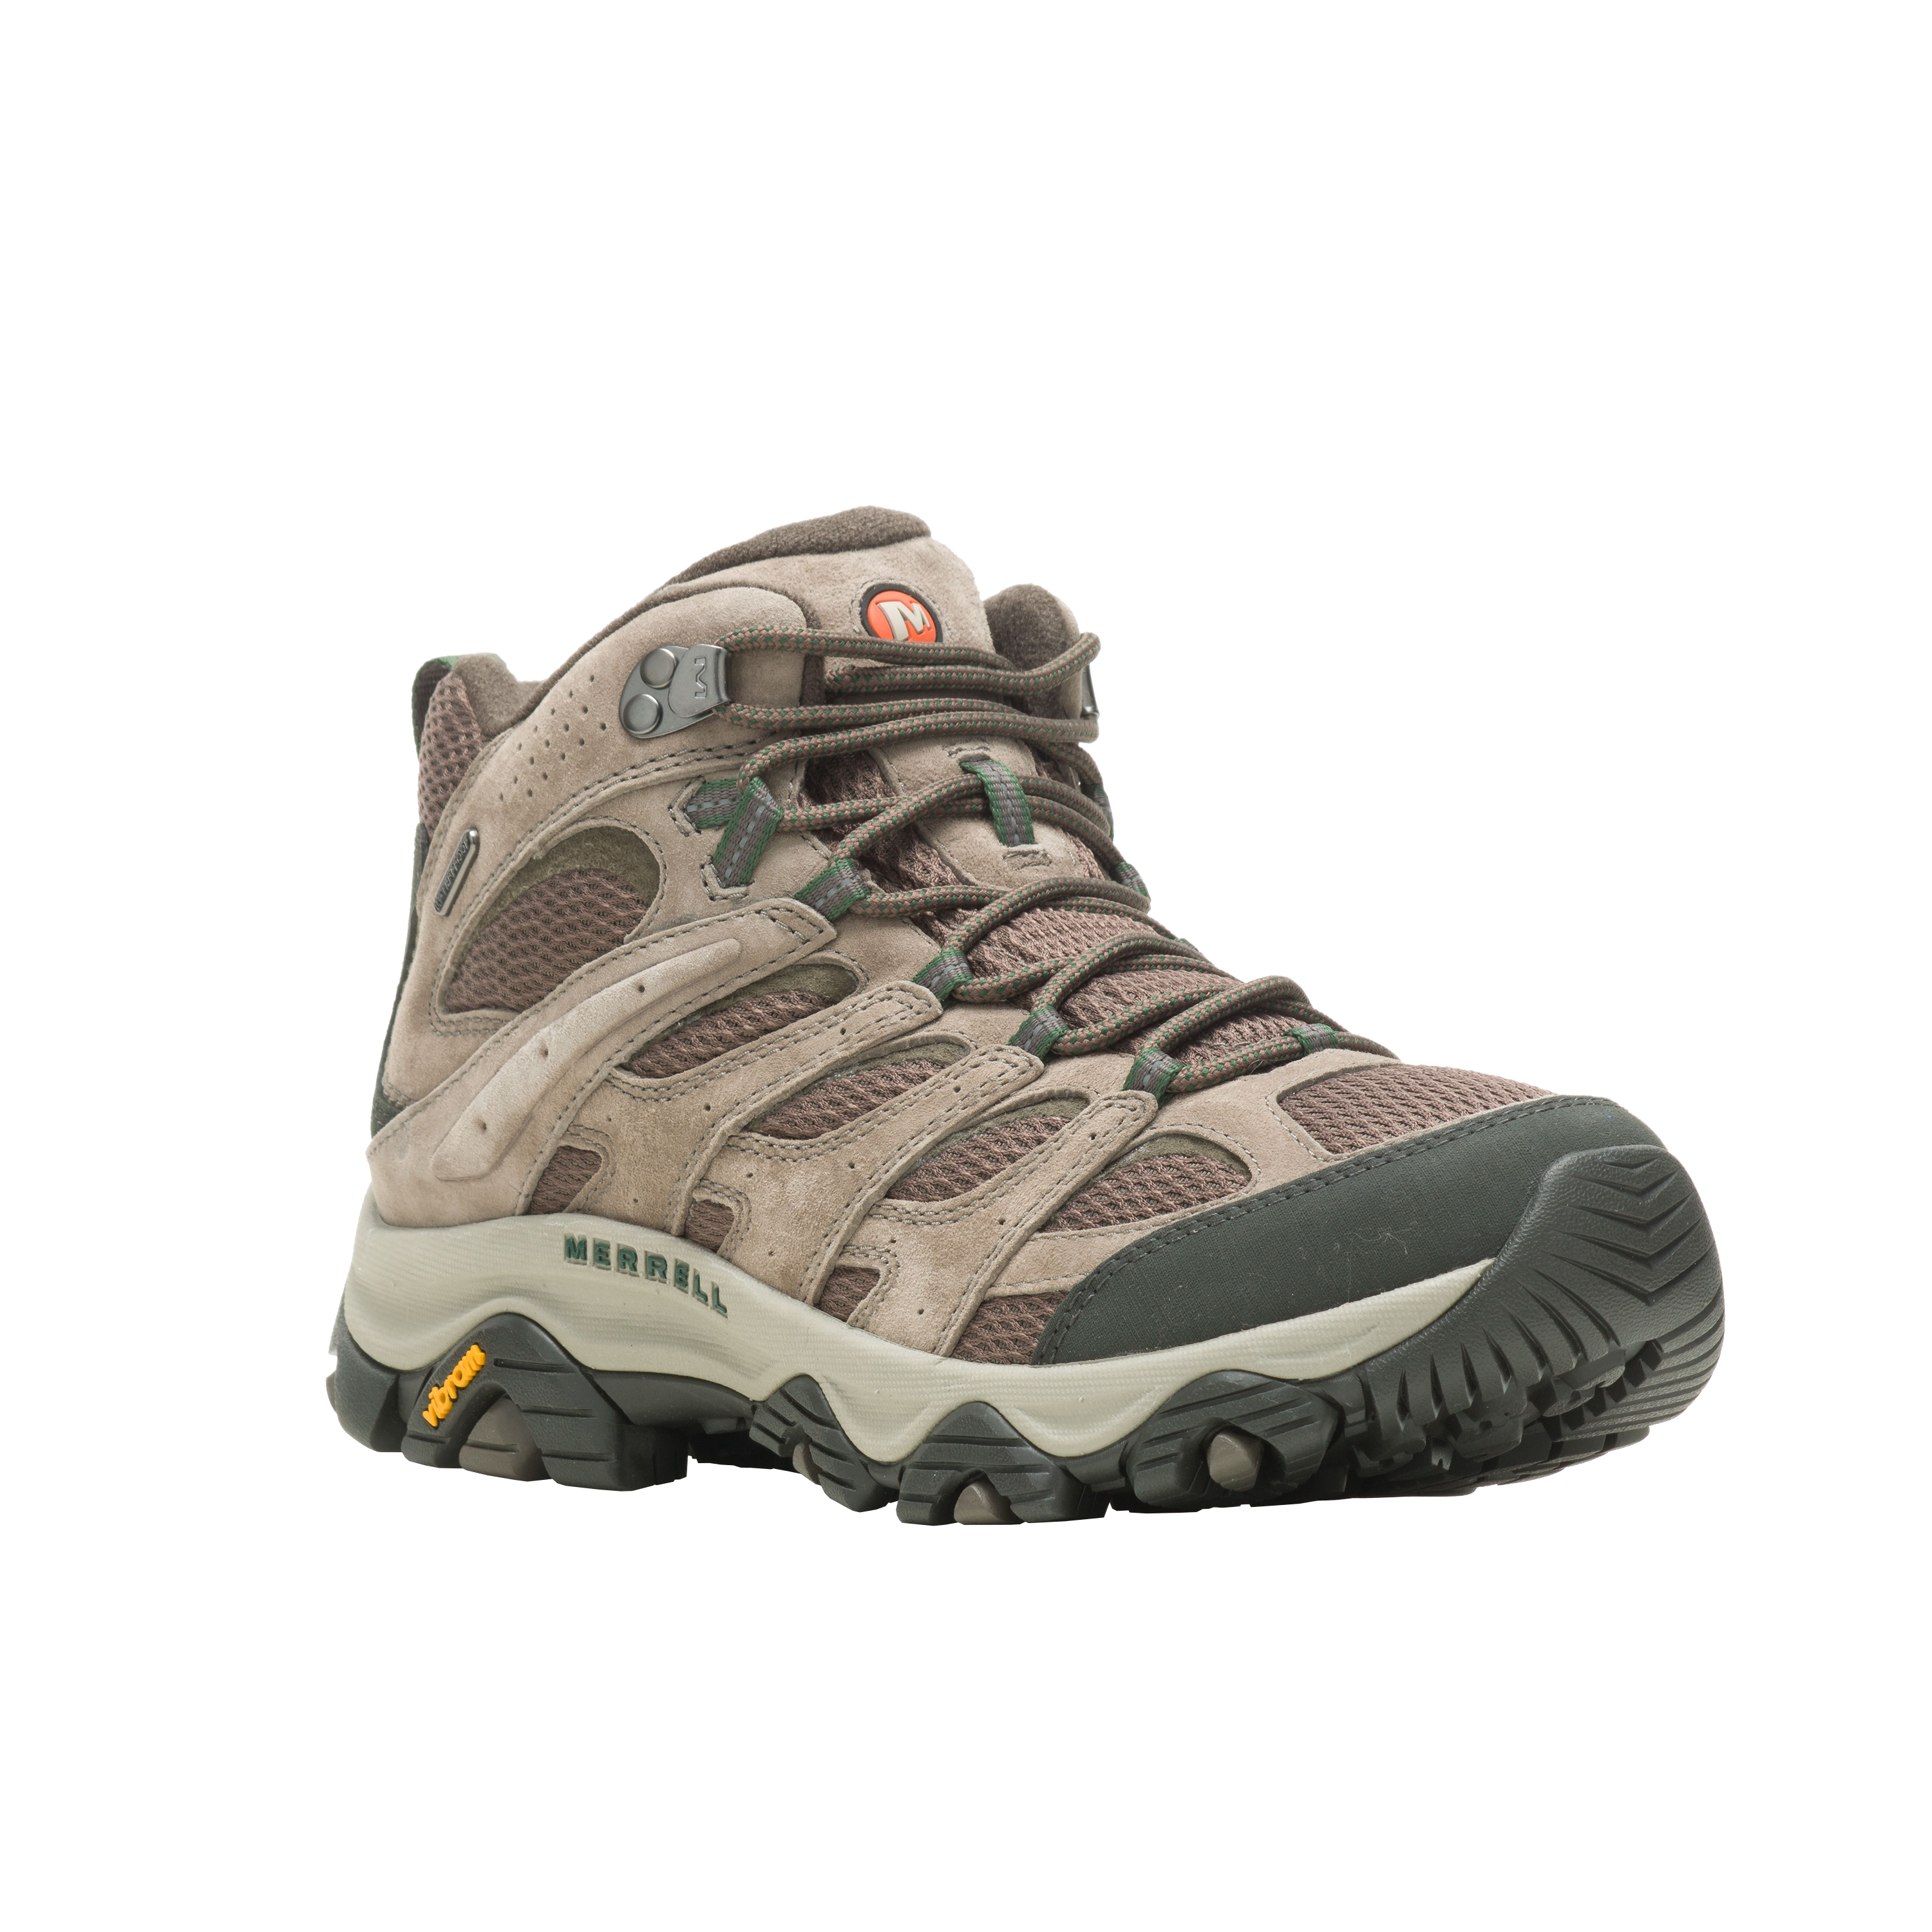 Merrell Moab 3 Mid Waterproof Hiking Boots for Men